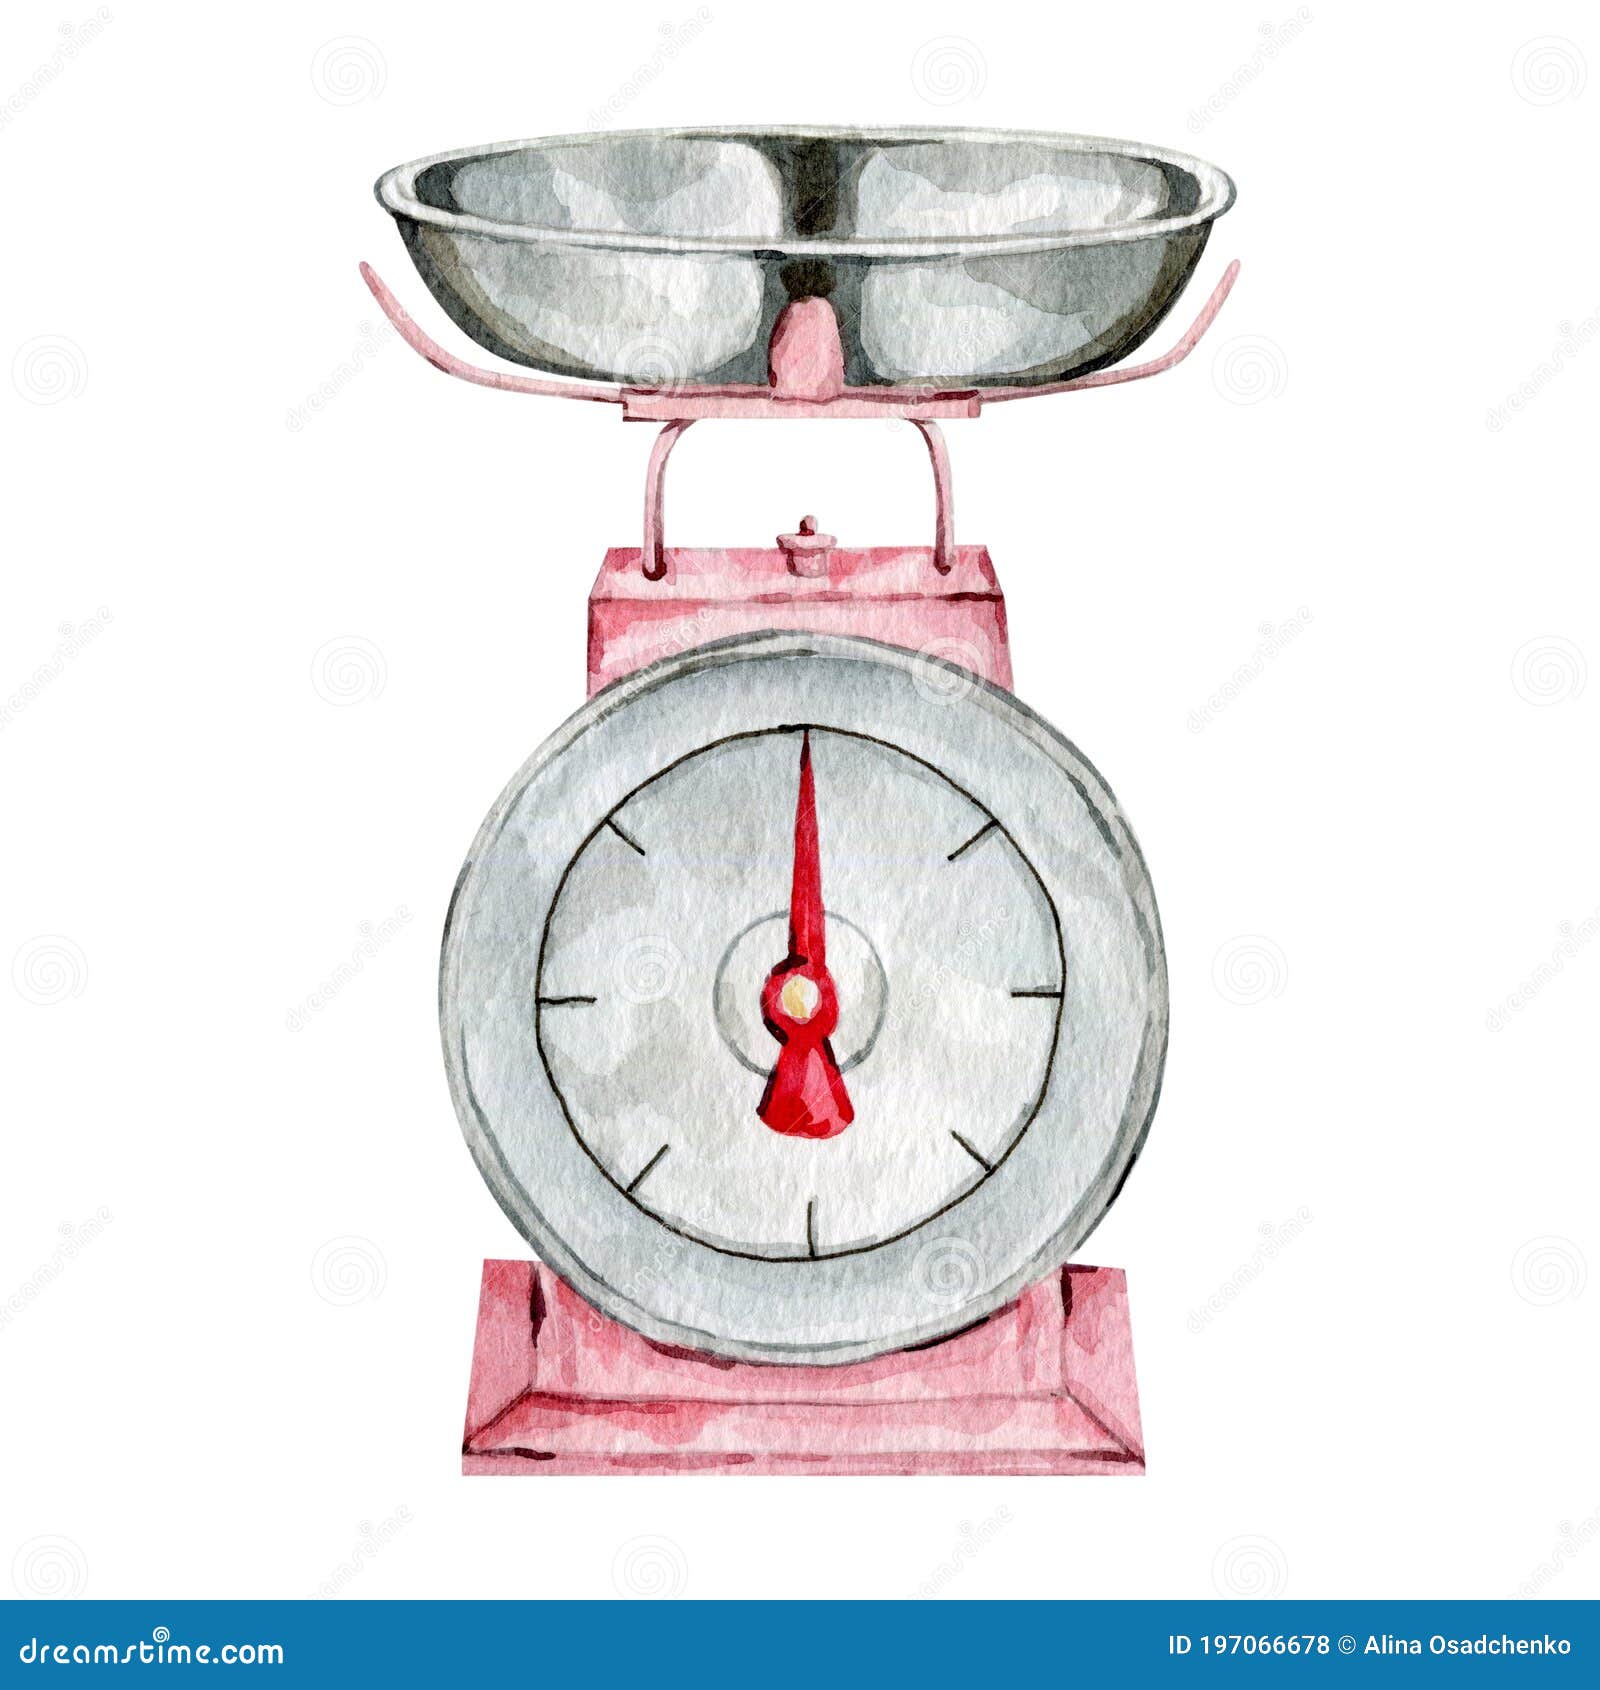 https://thumbs.dreamstime.com/z/watercolor-bakery-scale-kitchen-utensil-high-quality-illustration-hand-painted-baking-supplies-pastry-shop-watercolor-bakery-197066678.jpg